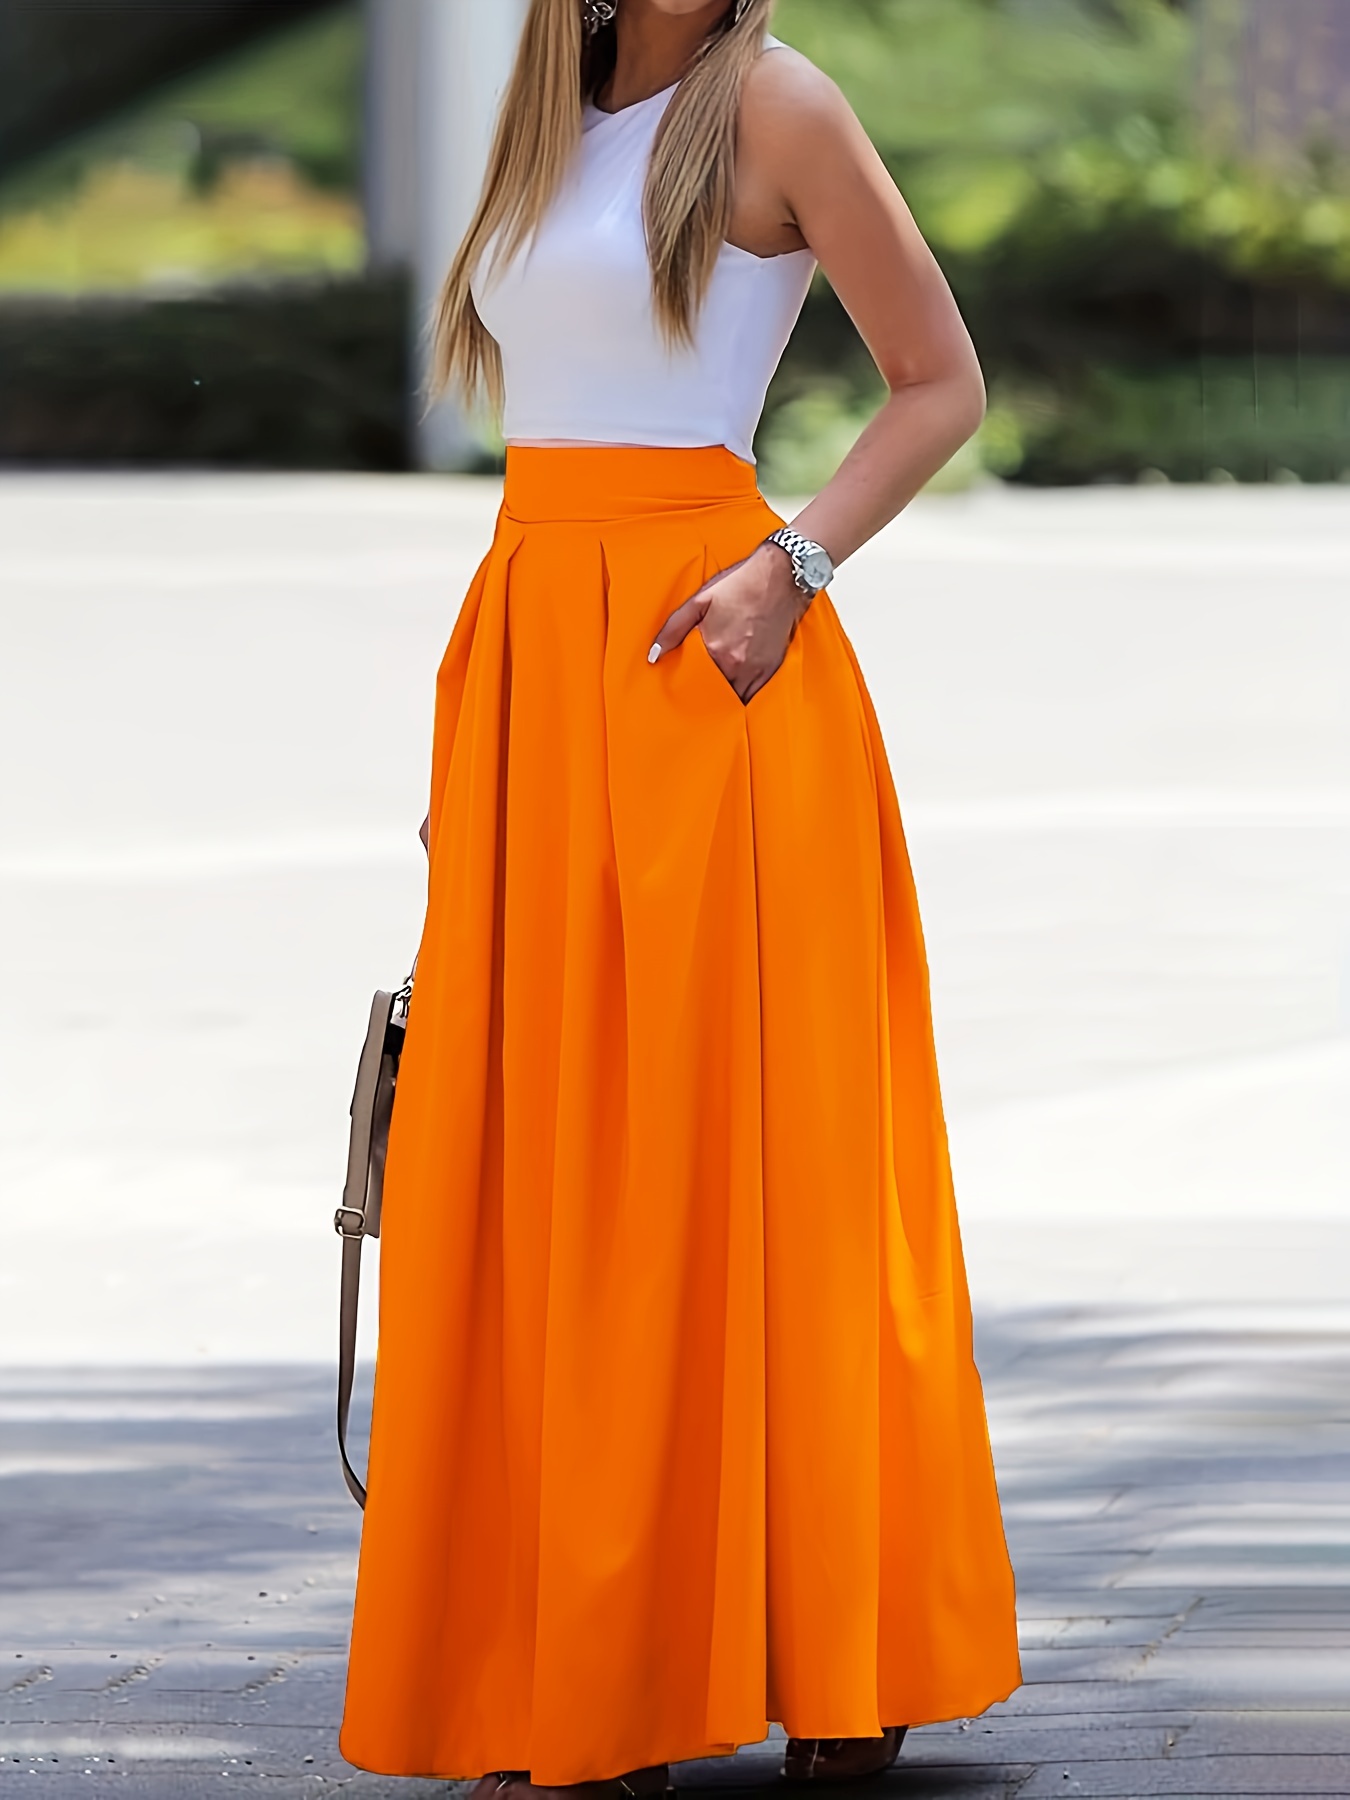 High Waisted Skirts for Women